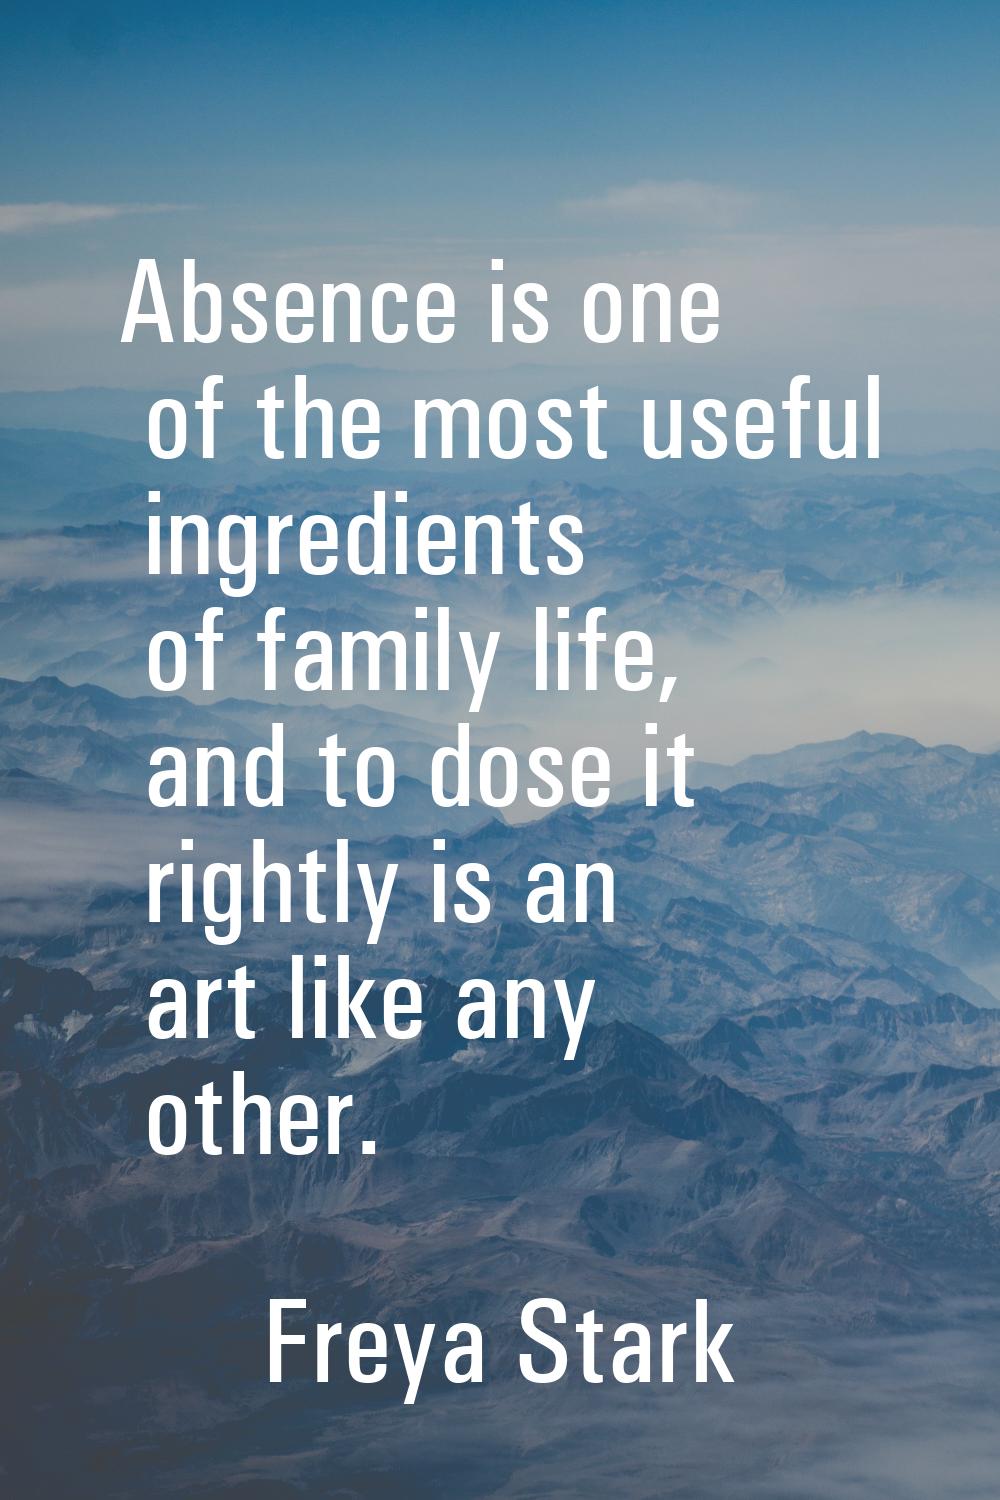 Absence is one of the most useful ingredients of family life, and to dose it rightly is an art like